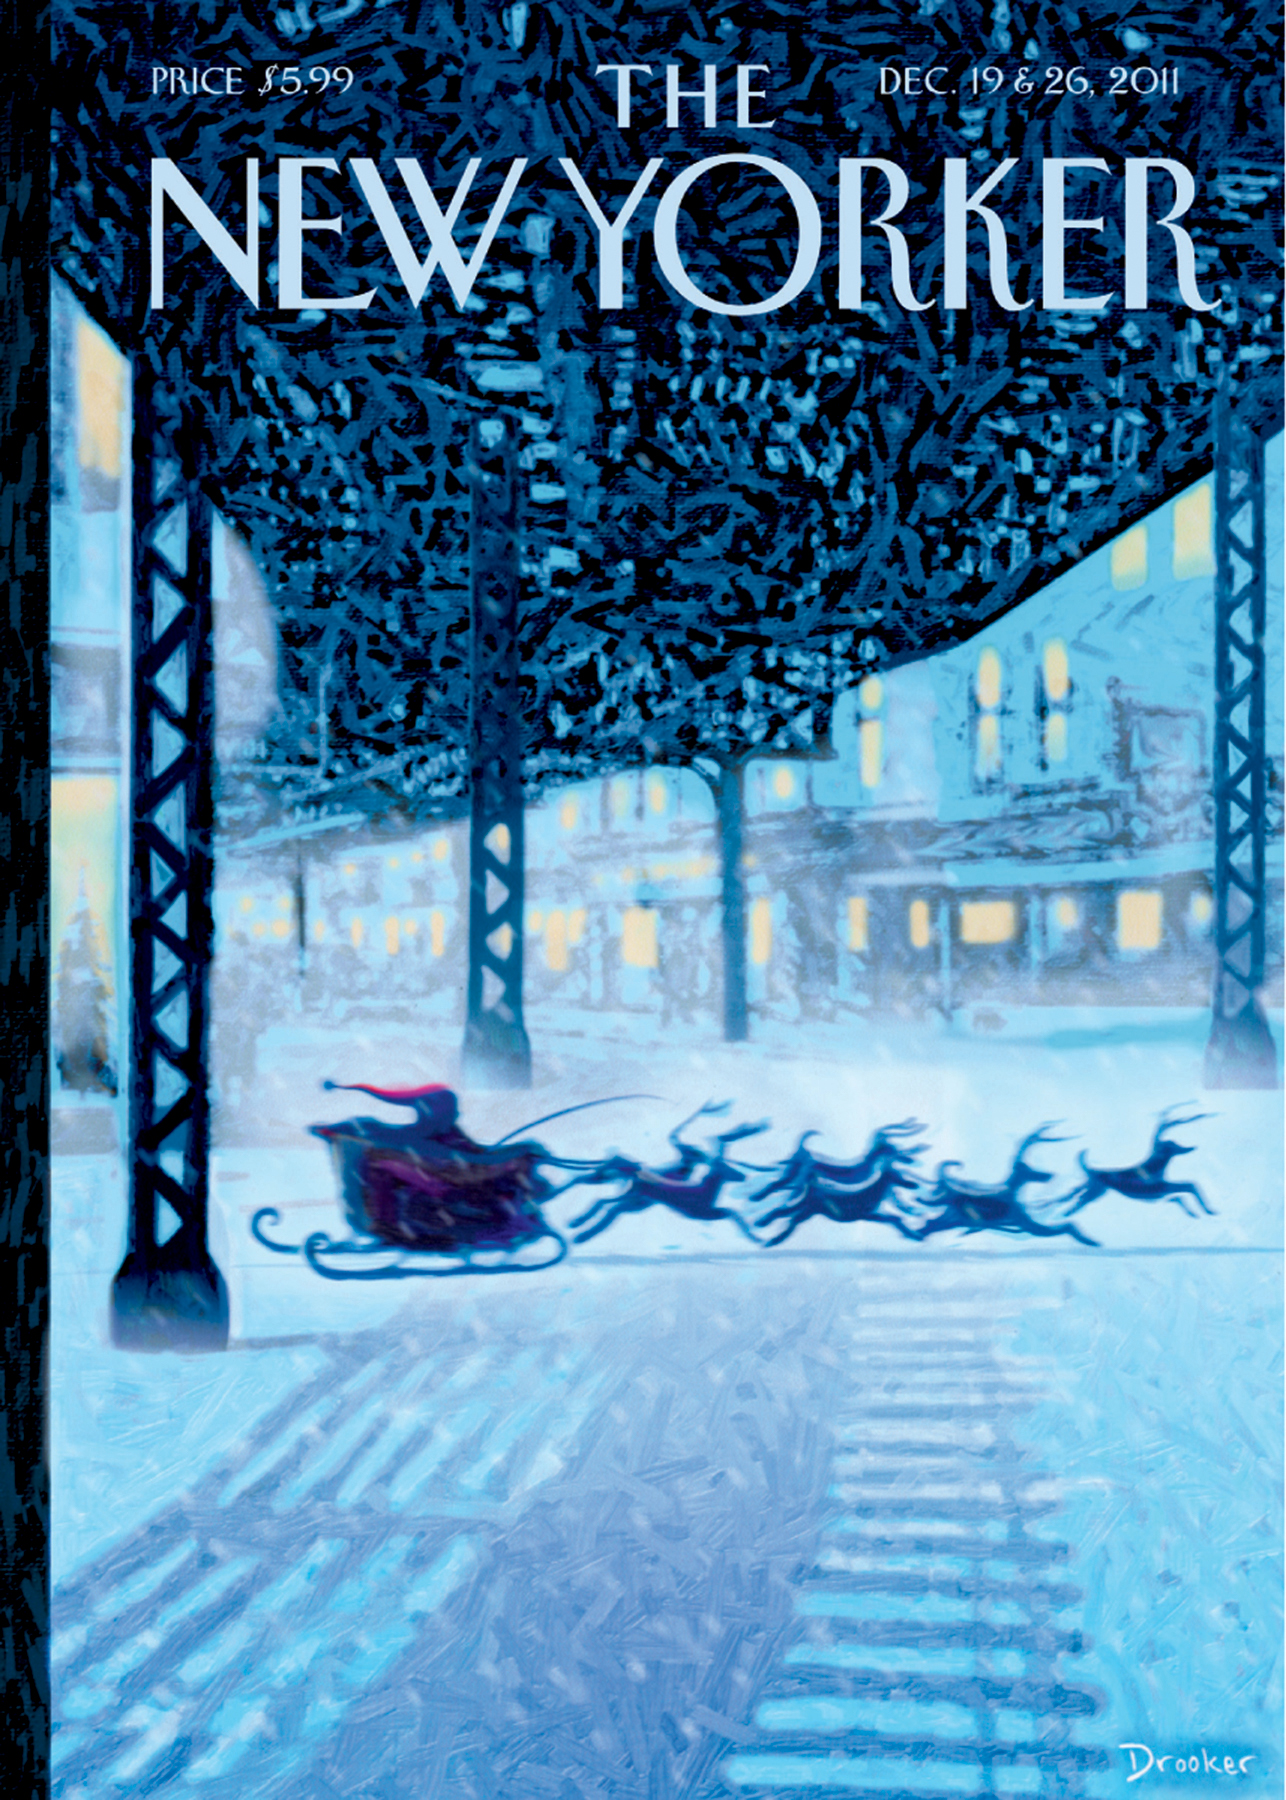 New Yorker Cover Card